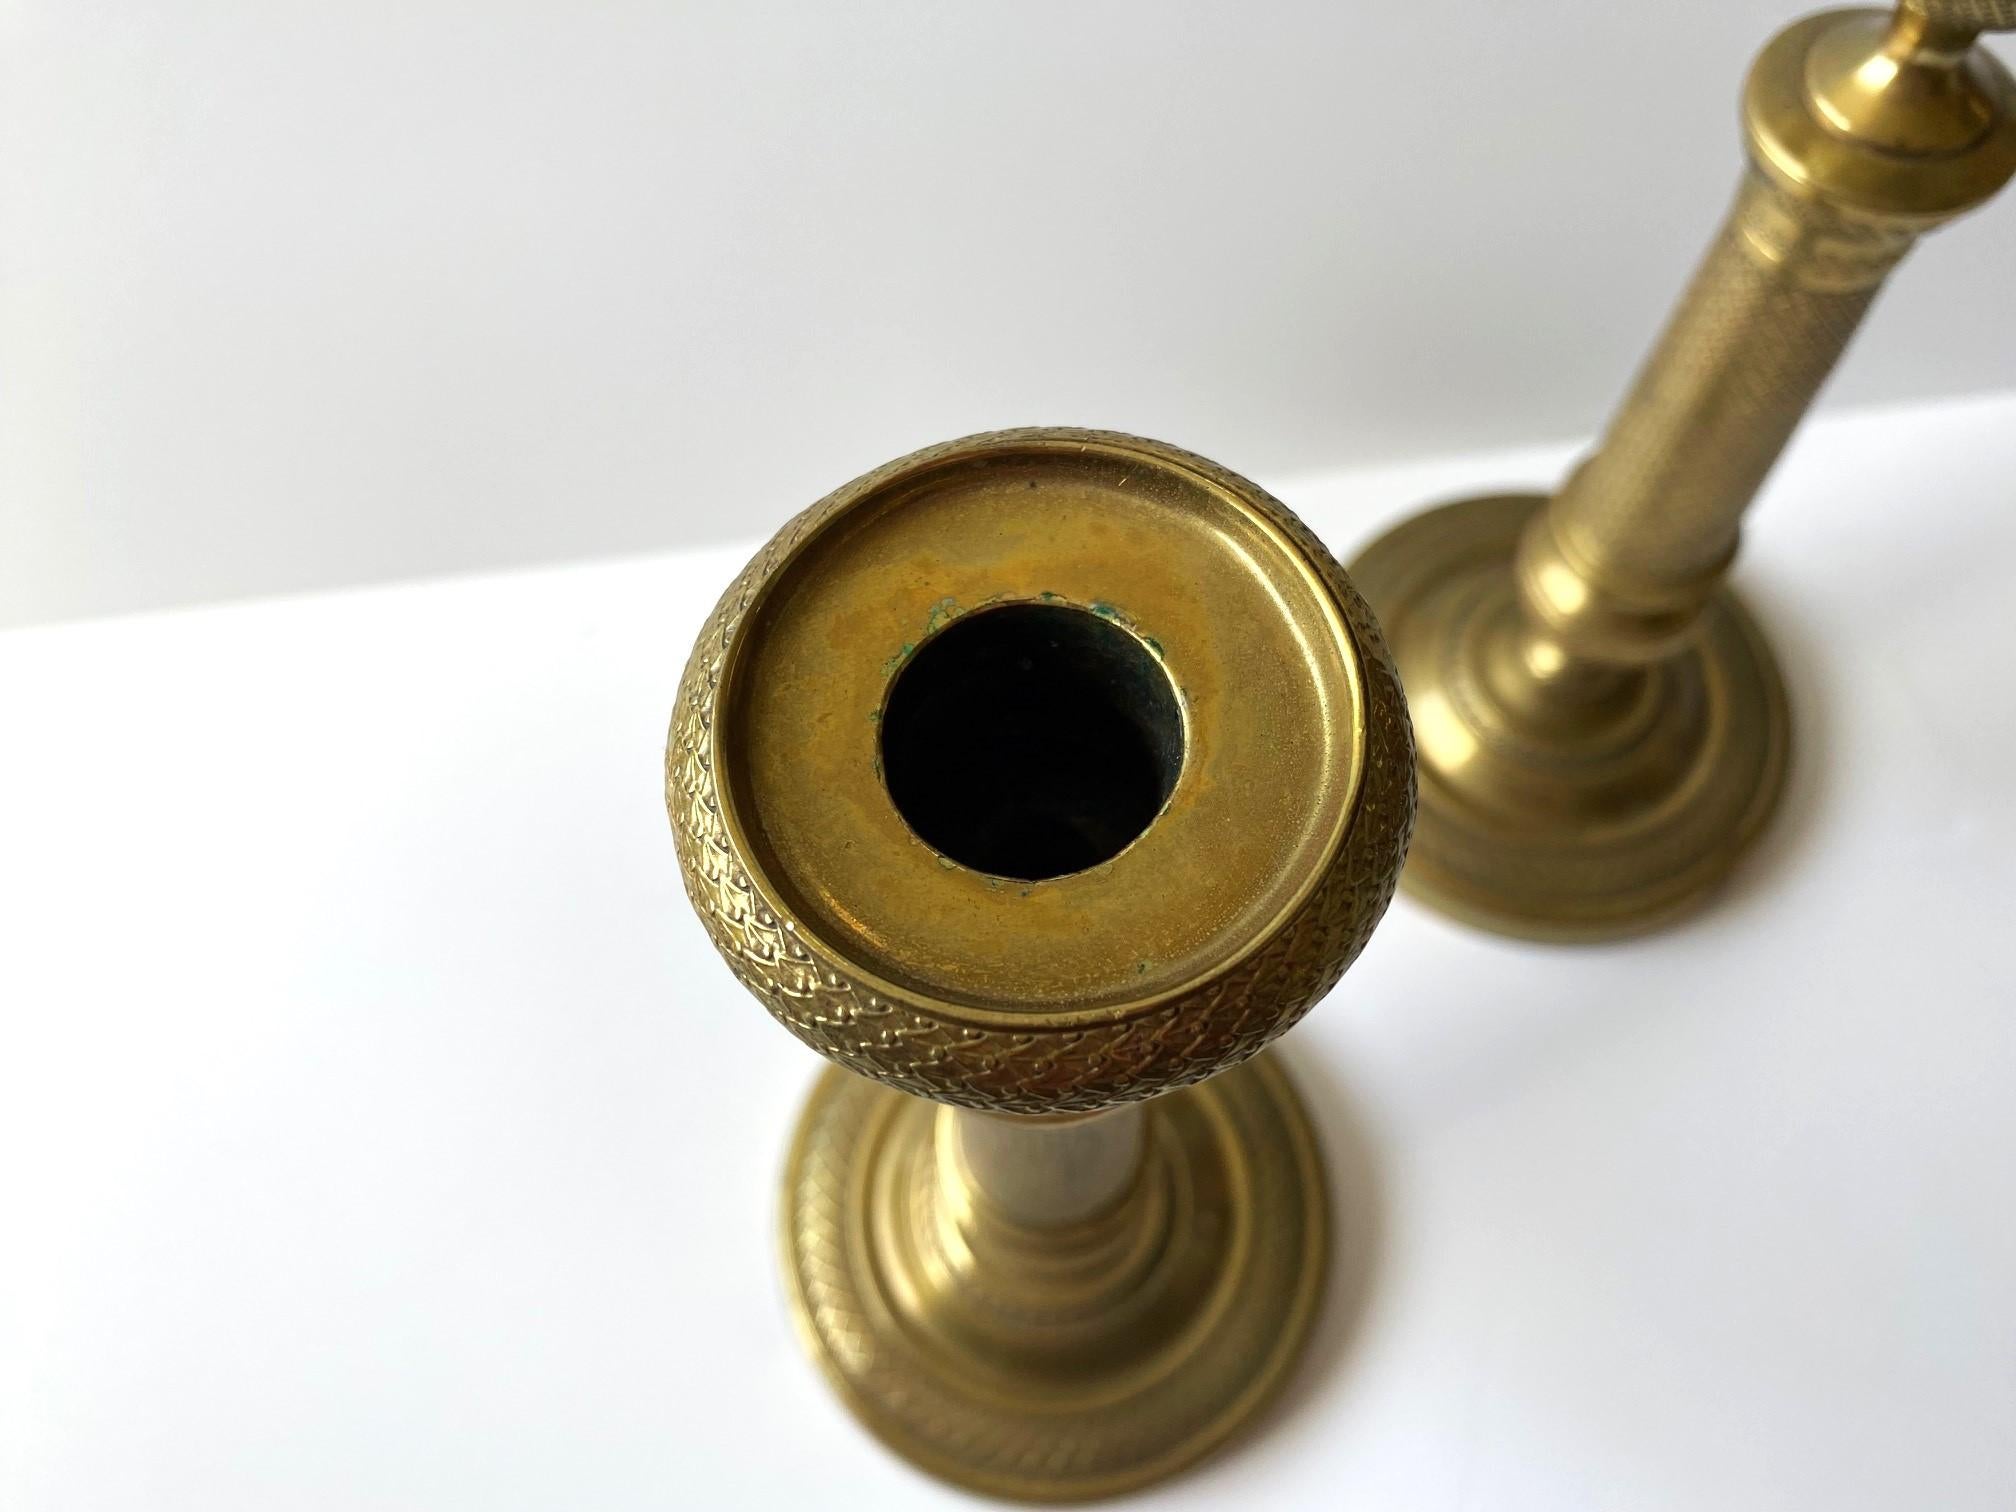 A pair of English brass candlesticks with a heavy Morrocan influence. Profusely engraved in super fine detail. Removable tops.  